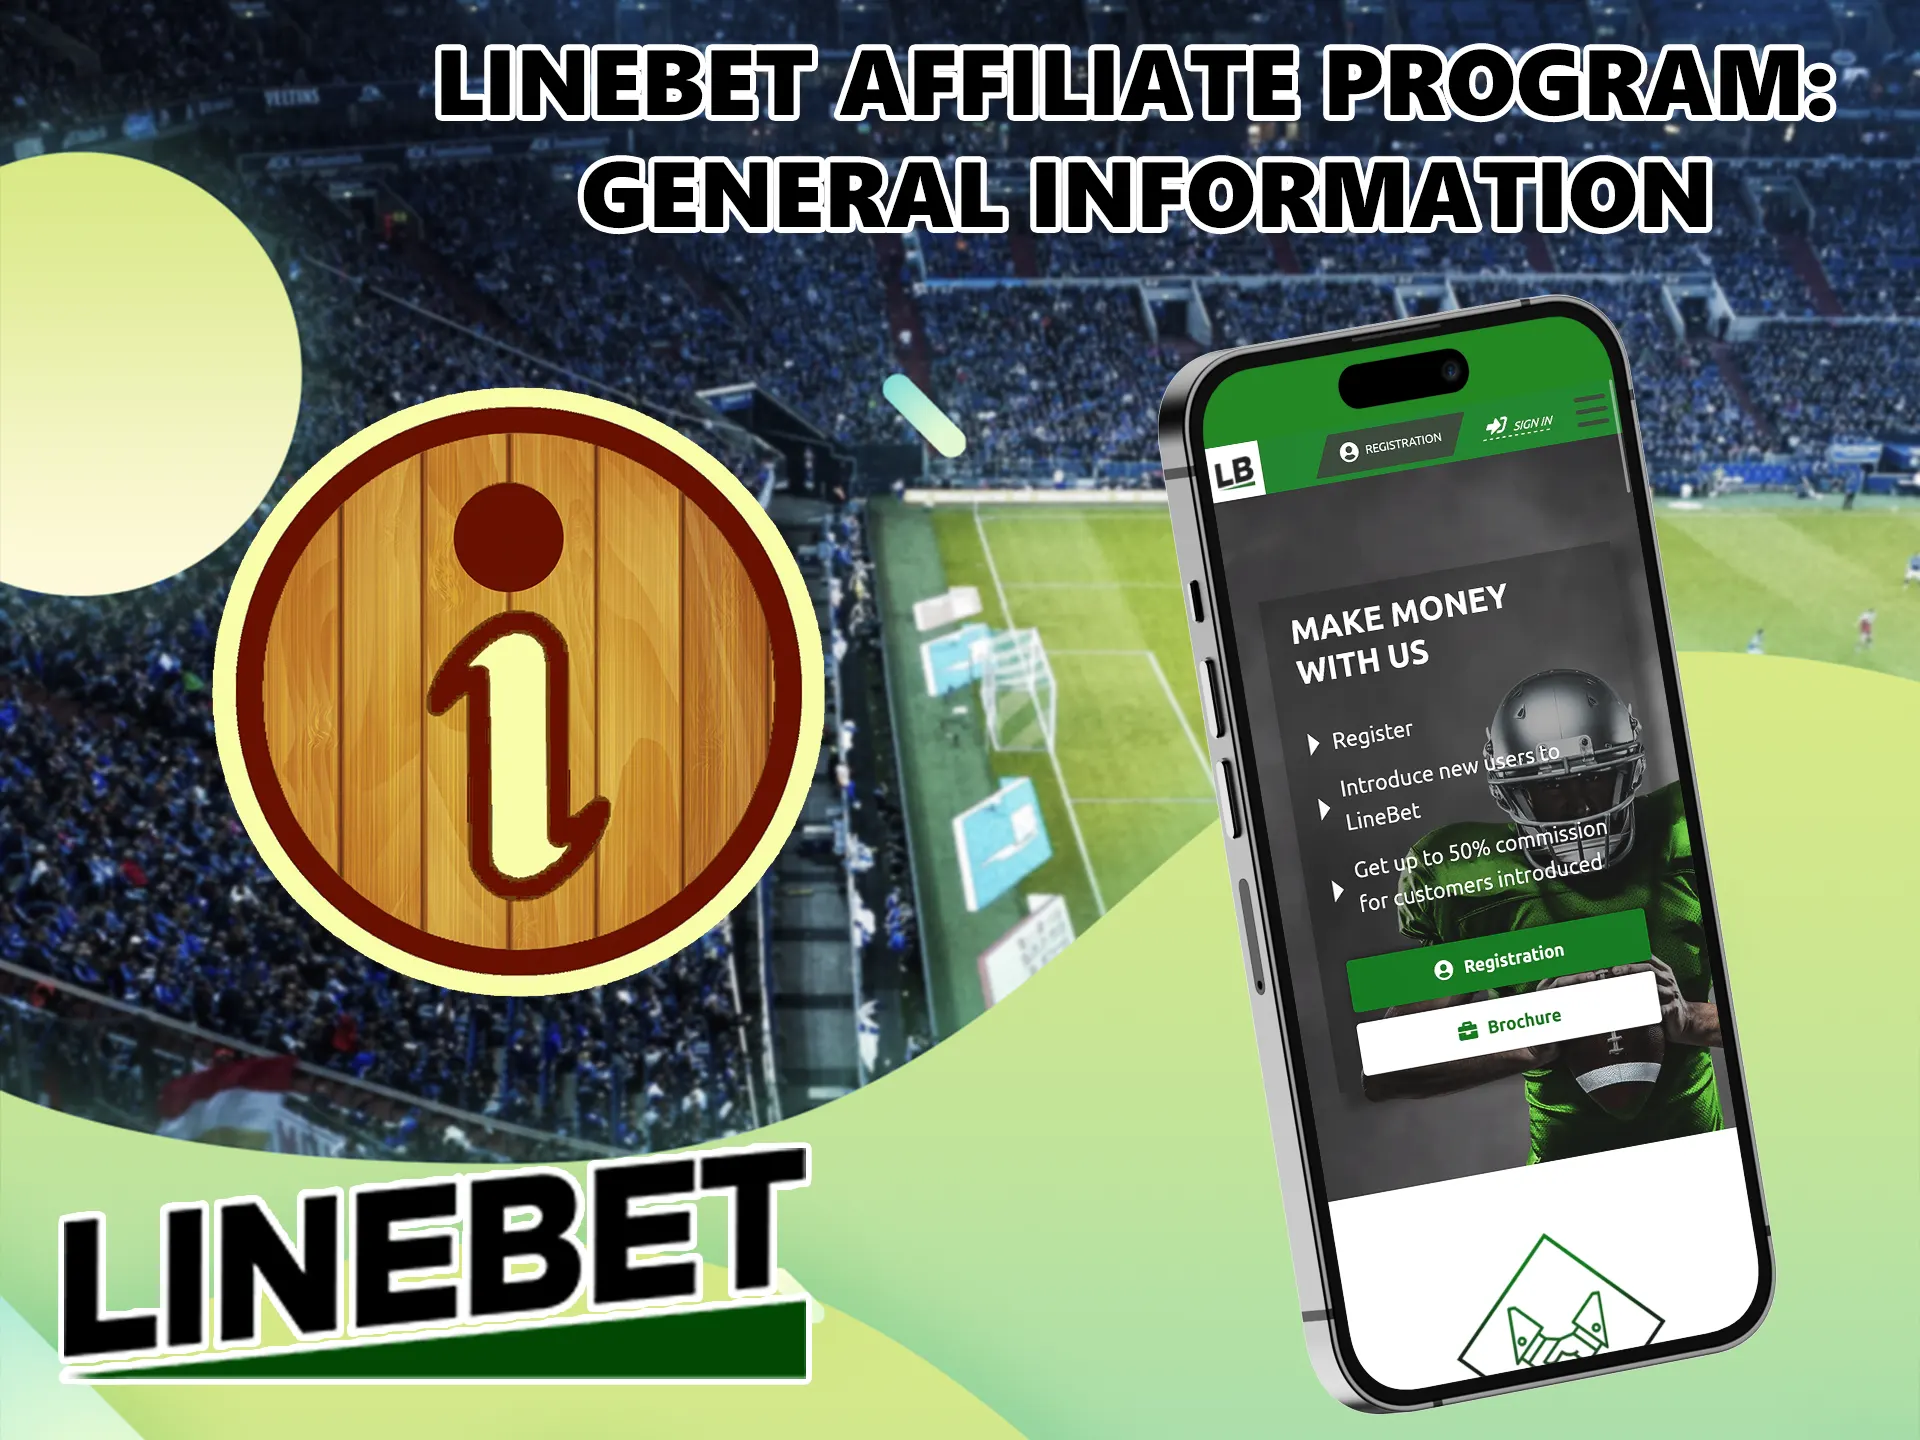 Find out more about the highlights of the Linebet affiliate program.